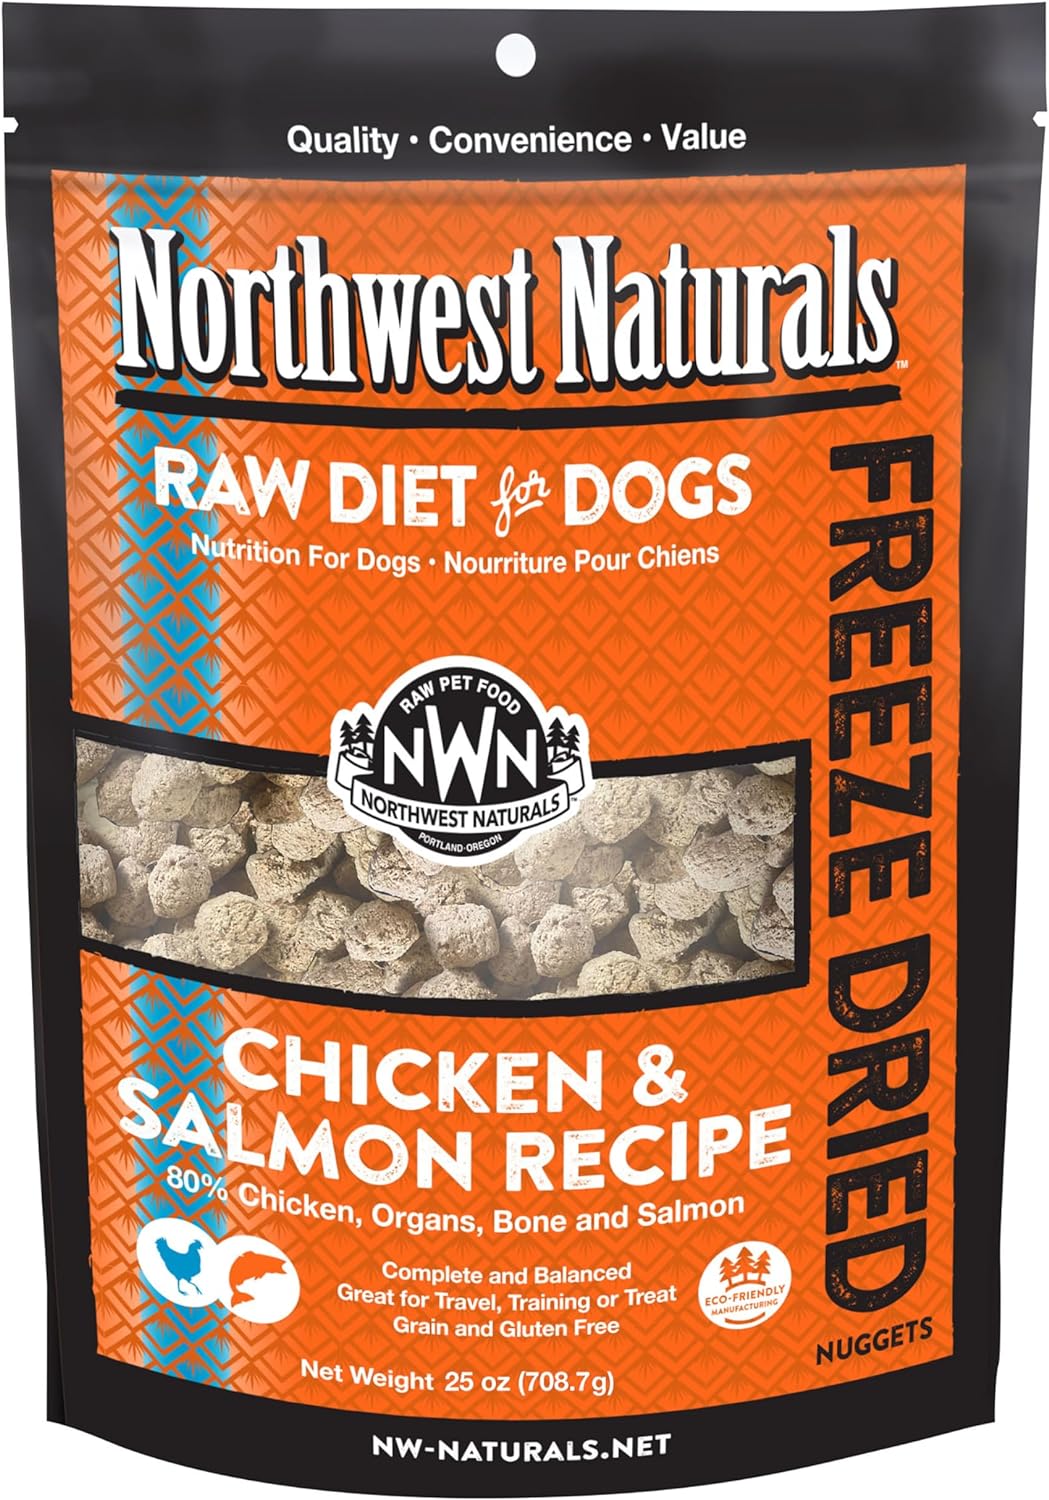 Northwest Naturals Freeze-Dried Chicken & Salmon Dog Food - Bite-Sized Nuggets - Healthy, Limited Ingredients, Human Grade Pet Food, All Natural - 25 Oz (Packaging May Vary)